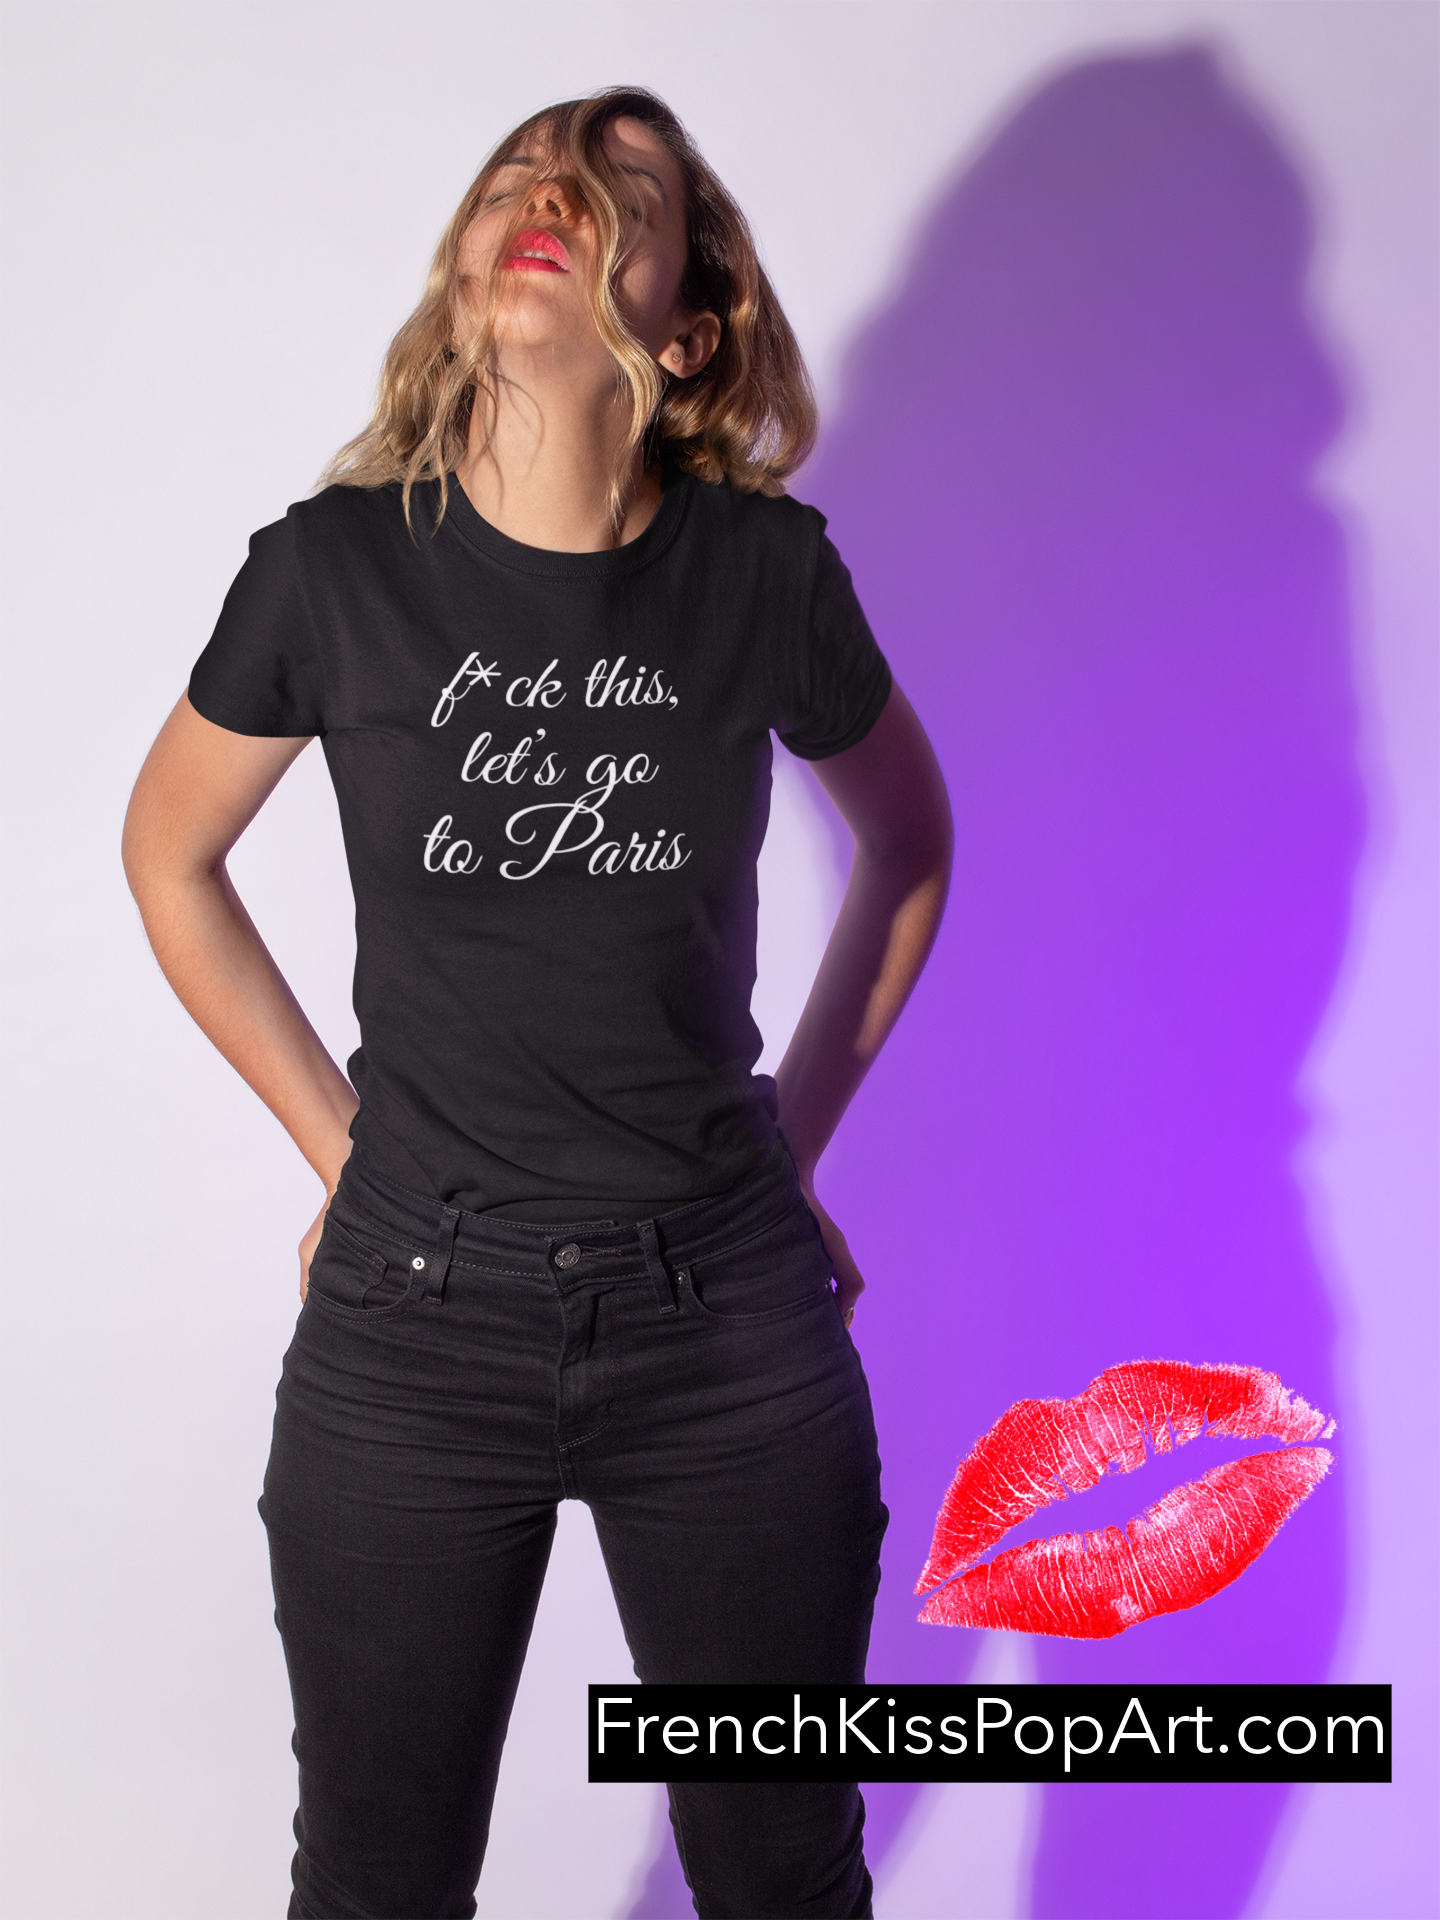 F*CK THIS LET'S GO TO PARIS French woman's relaxed travel t-shirt, france, couture, paris, sexy, French Kiss Pop Art, Chic